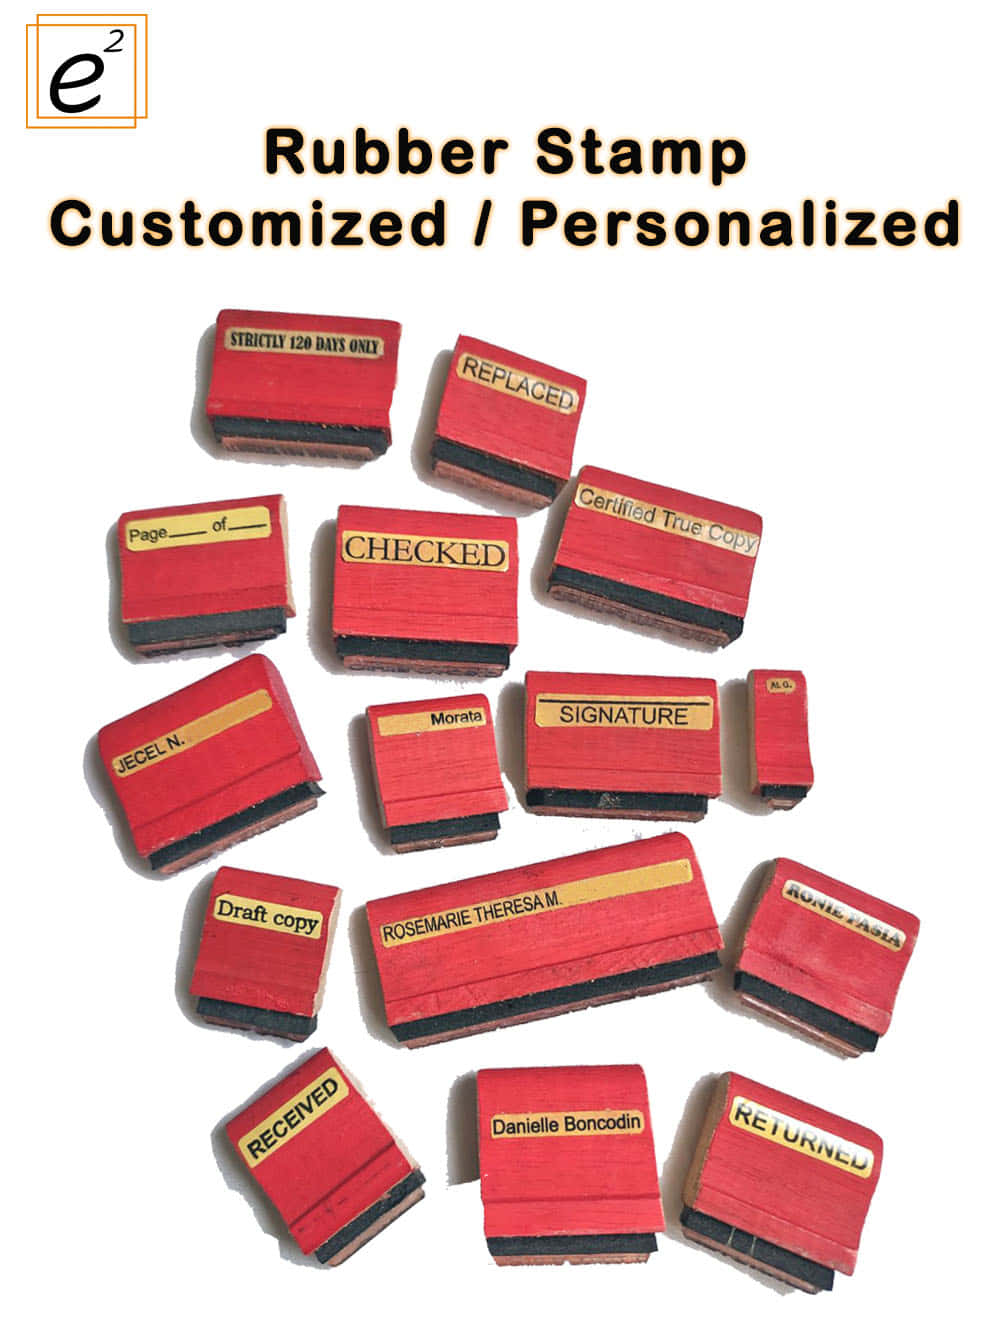 Rubber Stamps Personalized / Customized